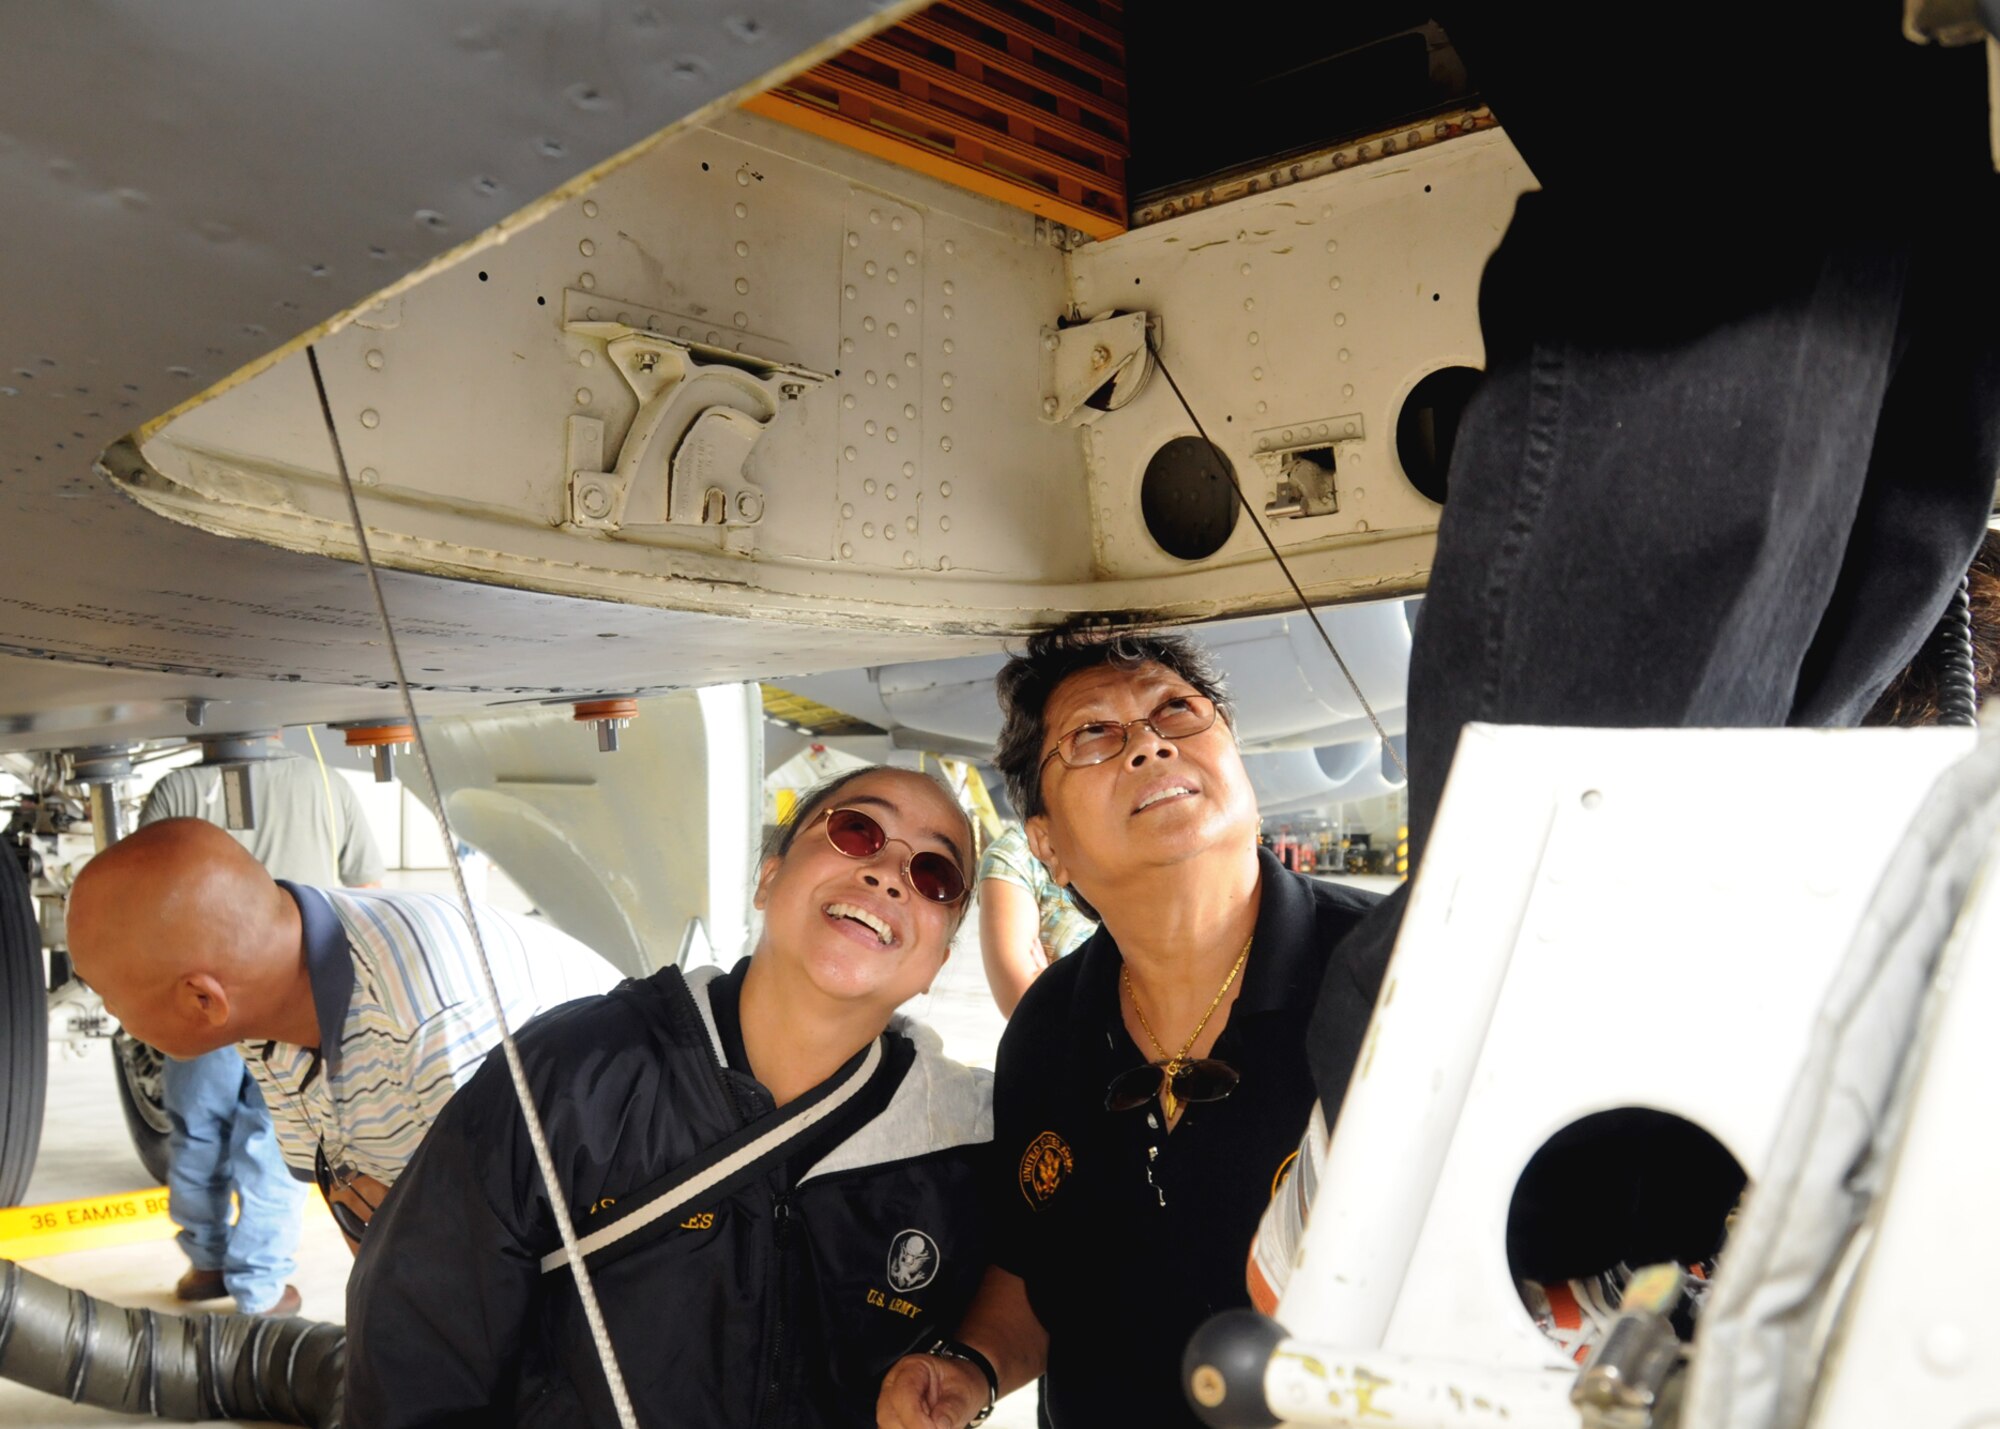 ANDERSEN AIR FORCE BASE, Guam - Military retirees and their families participate in a tour of a B-52 Stratofortress at Hanger One here Sept. 27. The tour was held in honor of Retiree Appreciation Day. (U.S. Air Force photo by Airman 1st Class Nichelle Griffiths)